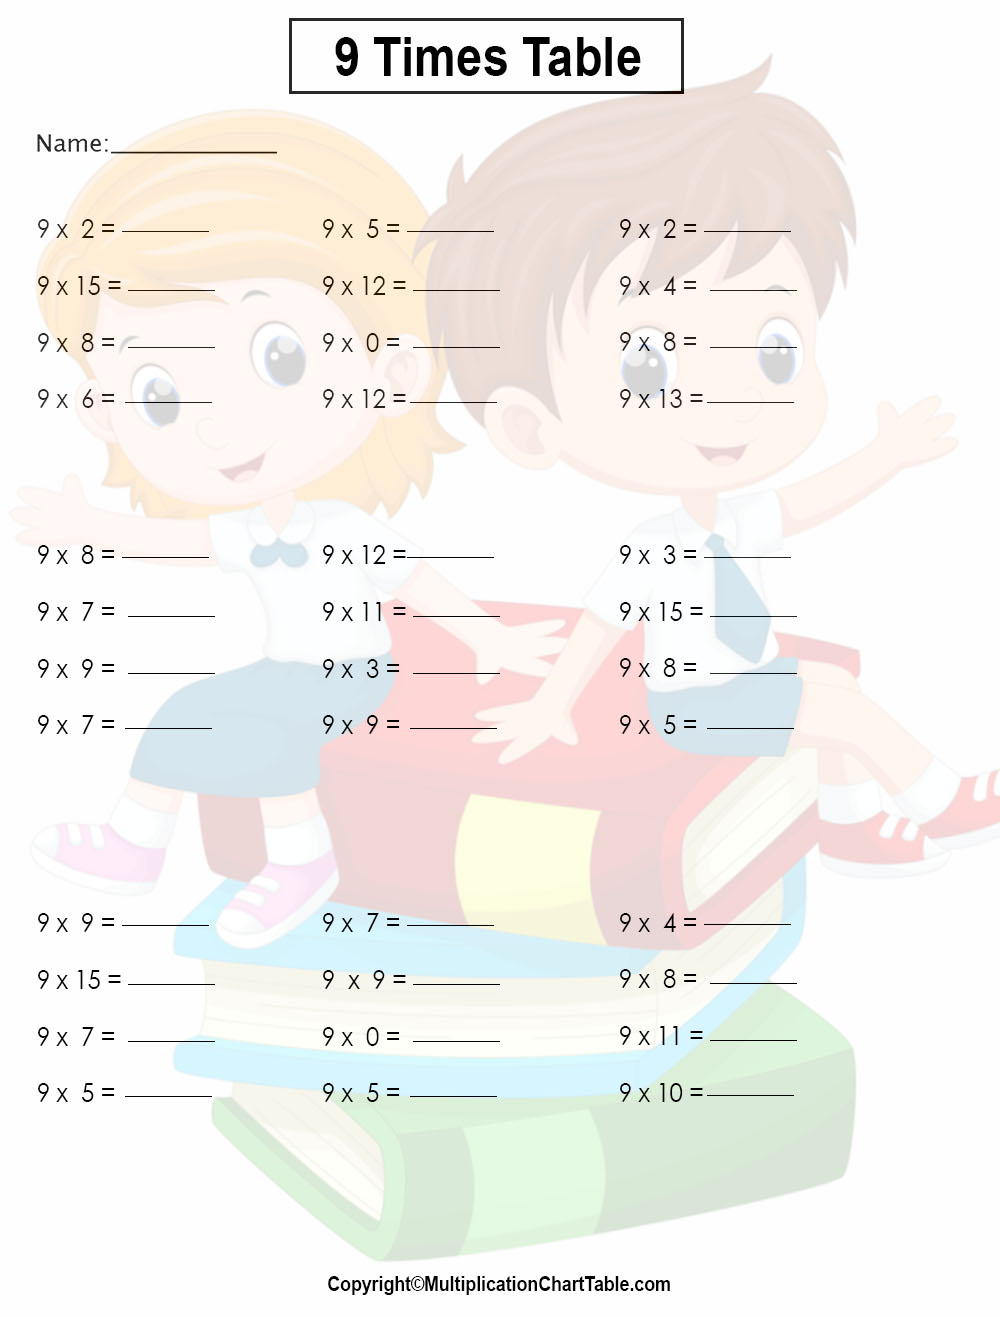 9 times table worksheets